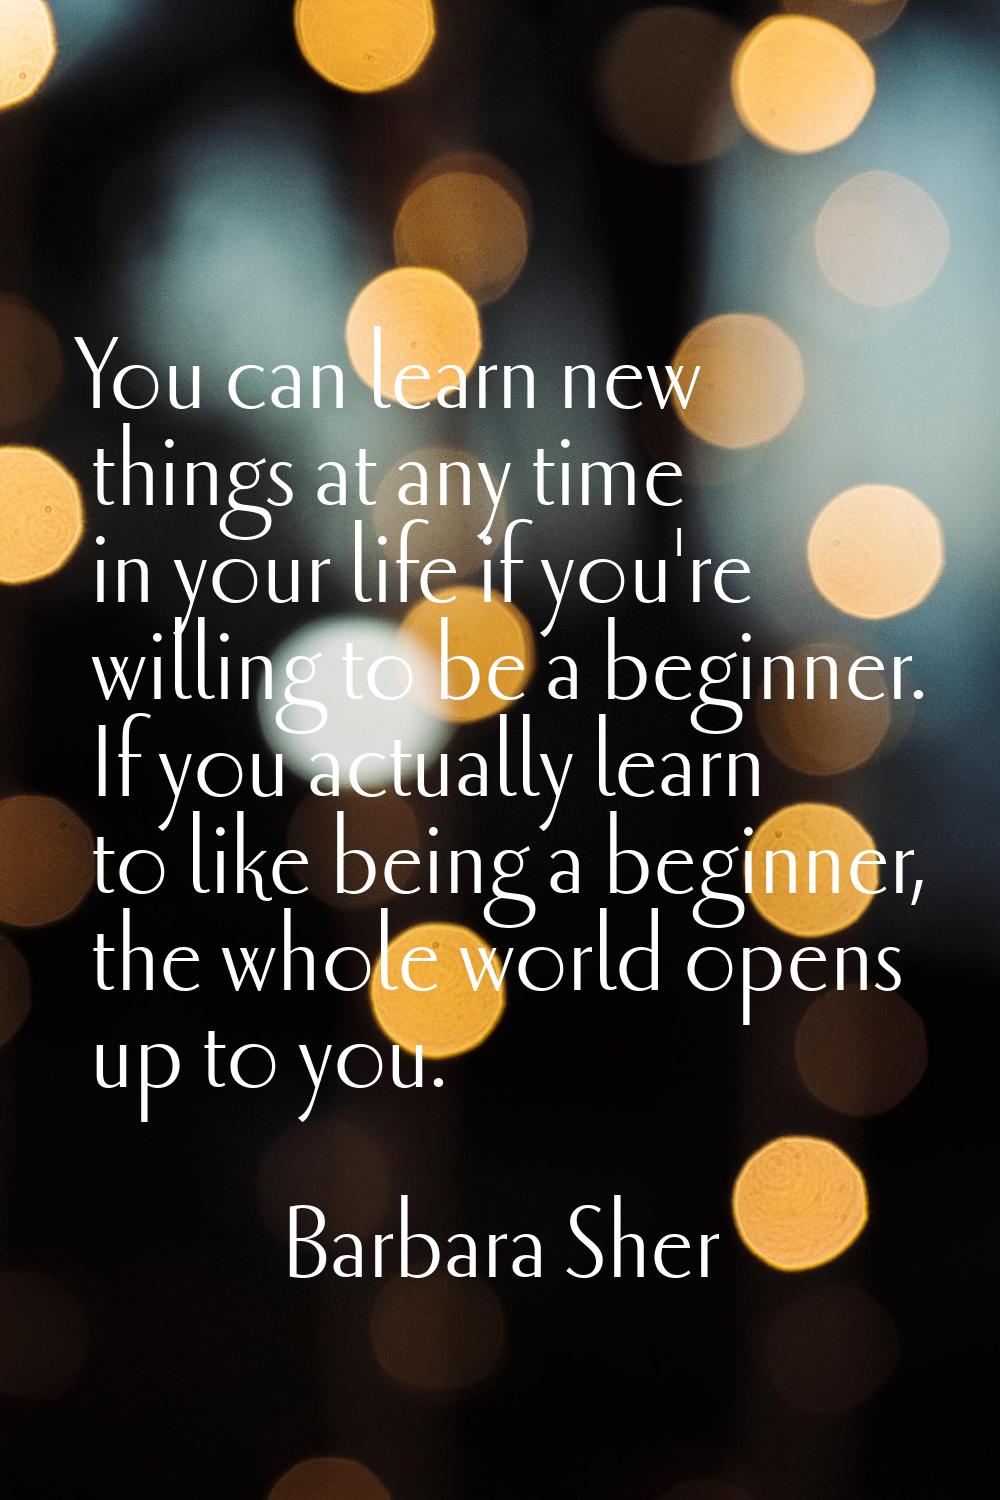 You can learn new things at any time in your life if you're willing to be a beginner. If you actual